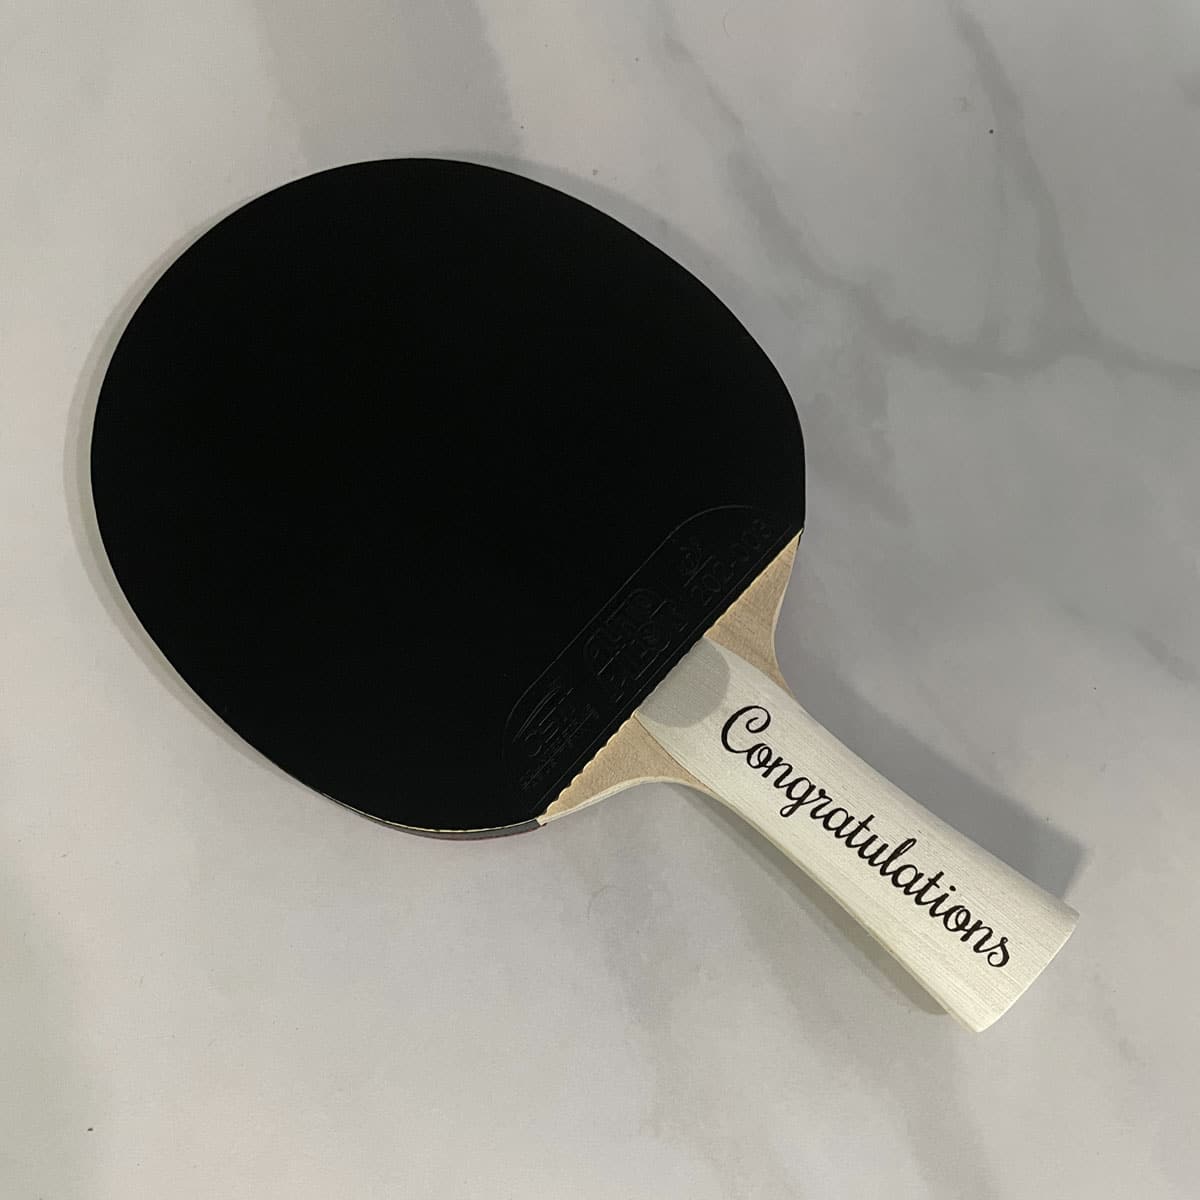 Custom Ping Pong Paddle Any Text Engraved for Free Table 